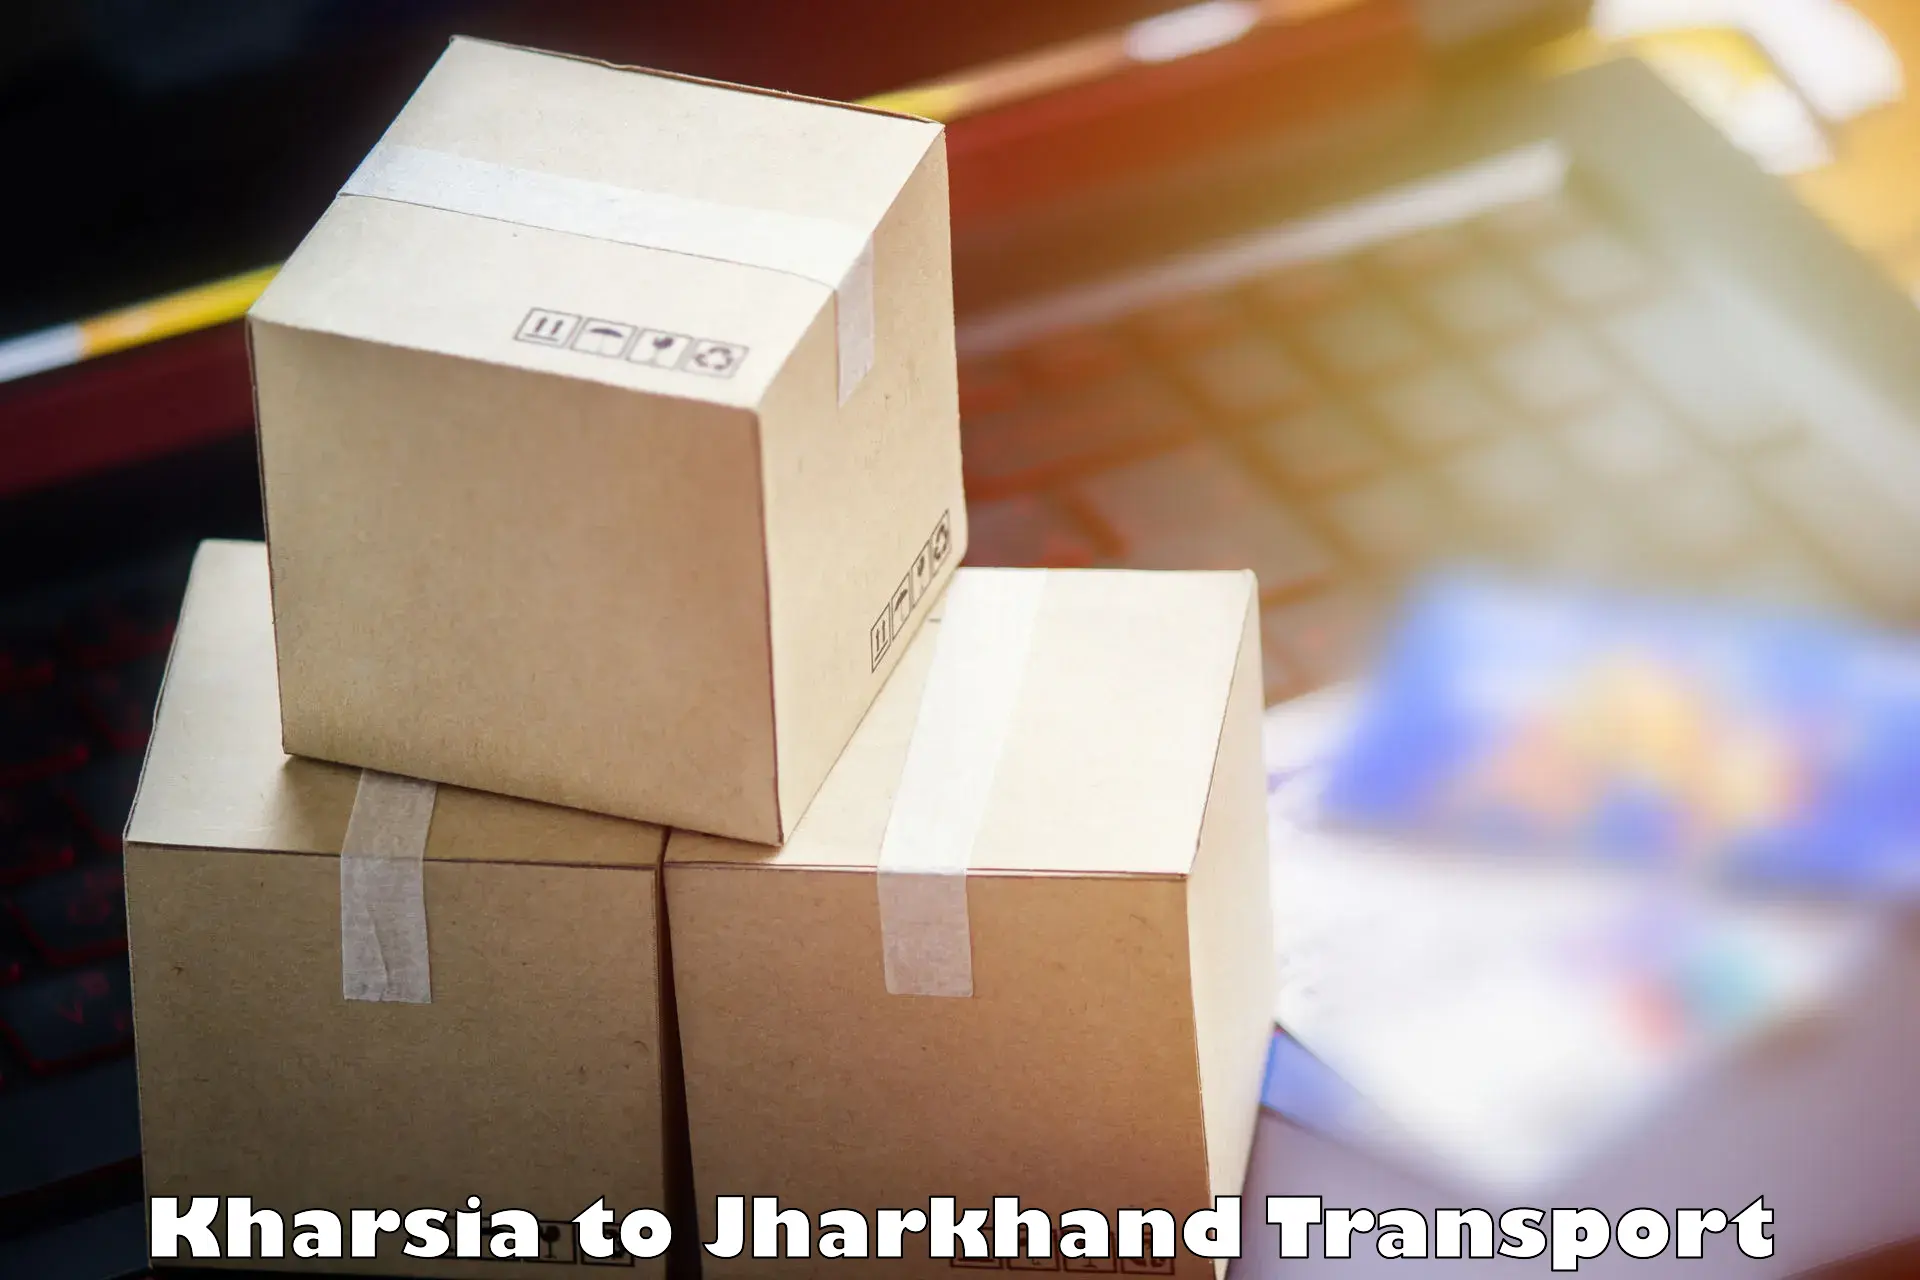 Delivery service Kharsia to IIT Dhanbad